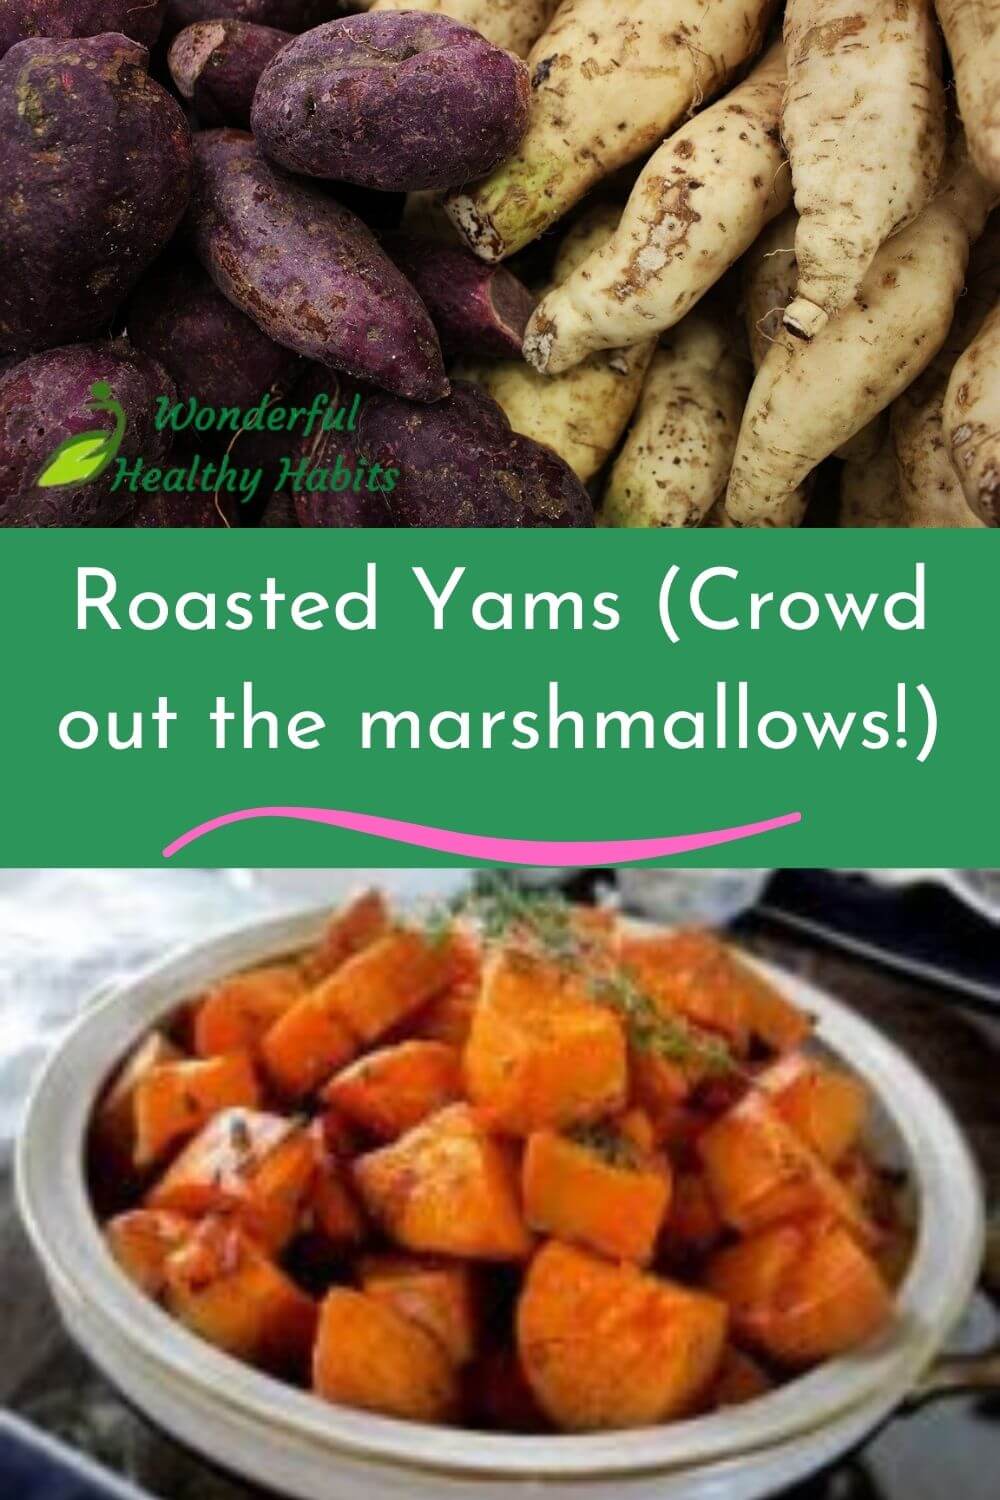 Roasted Yams (Crowd out the marshmallows!) Healthy Recipe